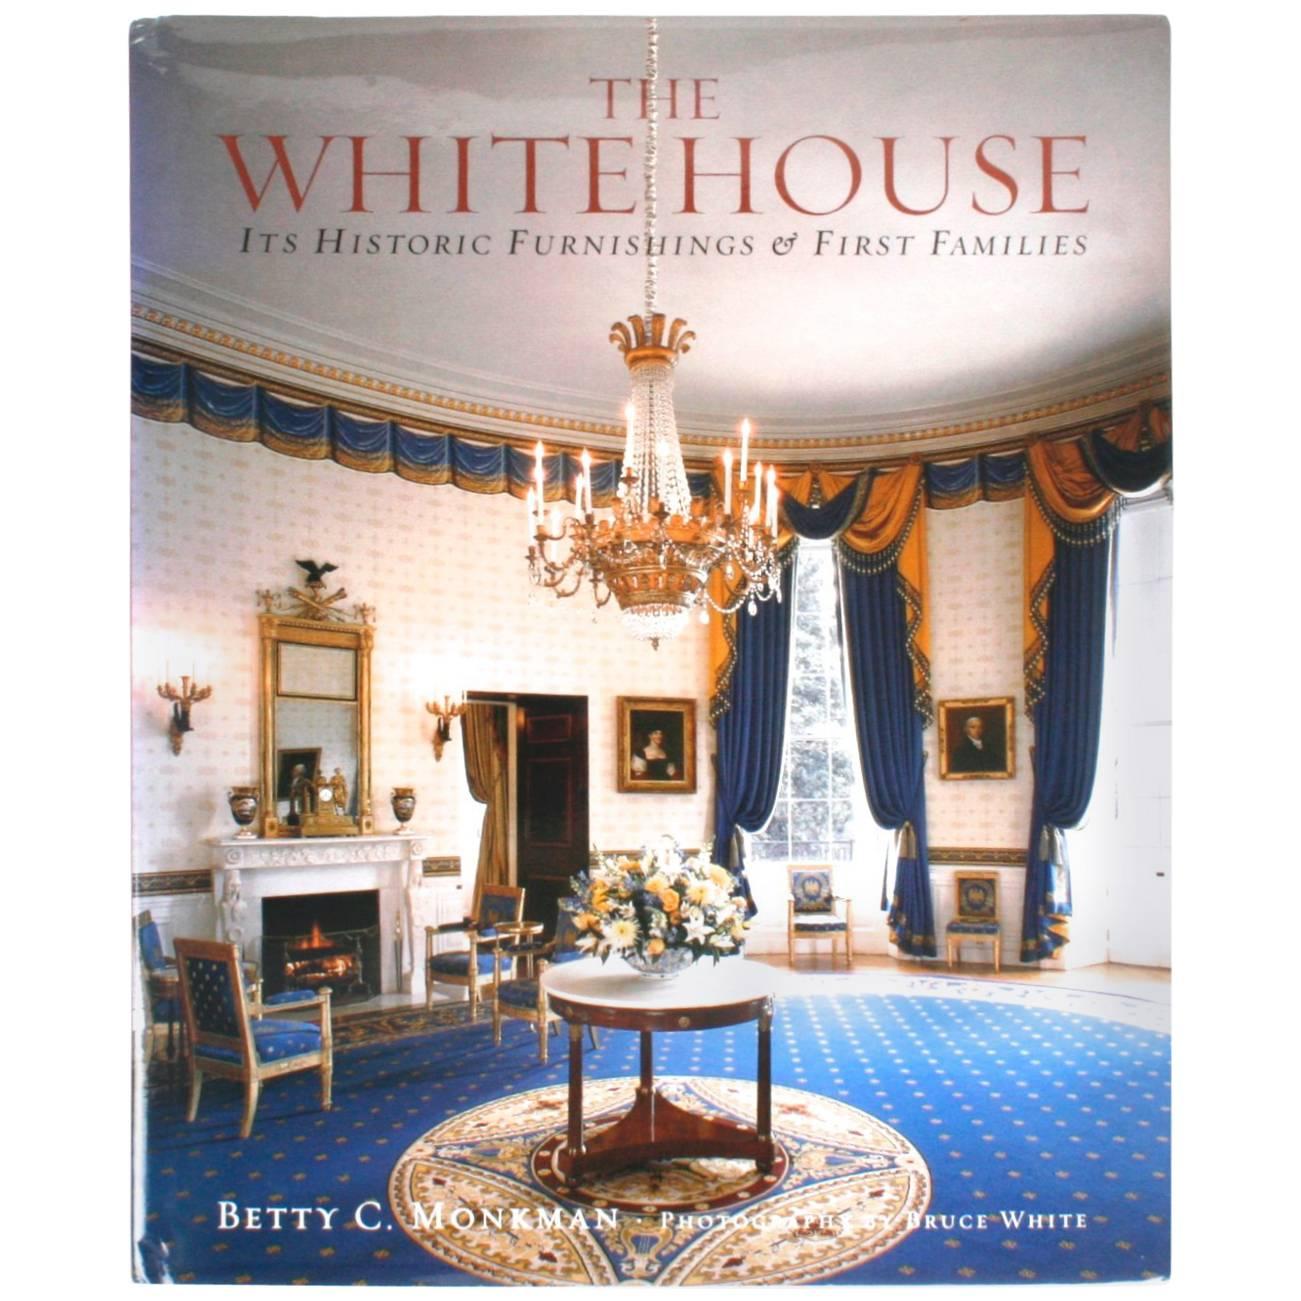 "The White House, It's Historic Furnishings & First Families" First Edition Book For Sale